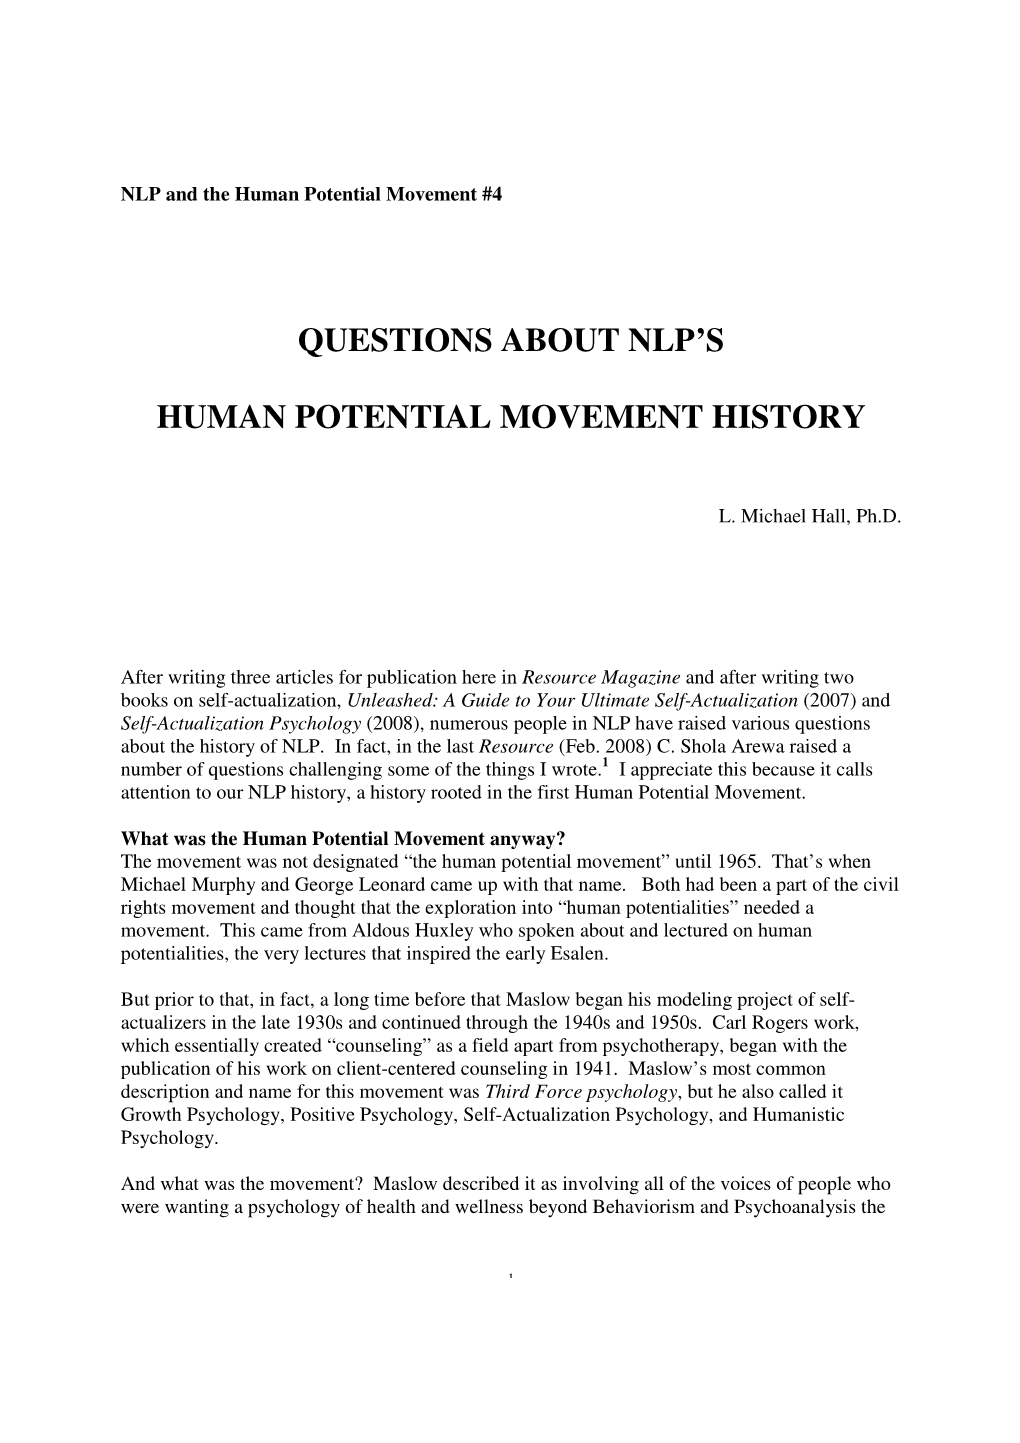 Questions About Nlp's Human Potential Movement History